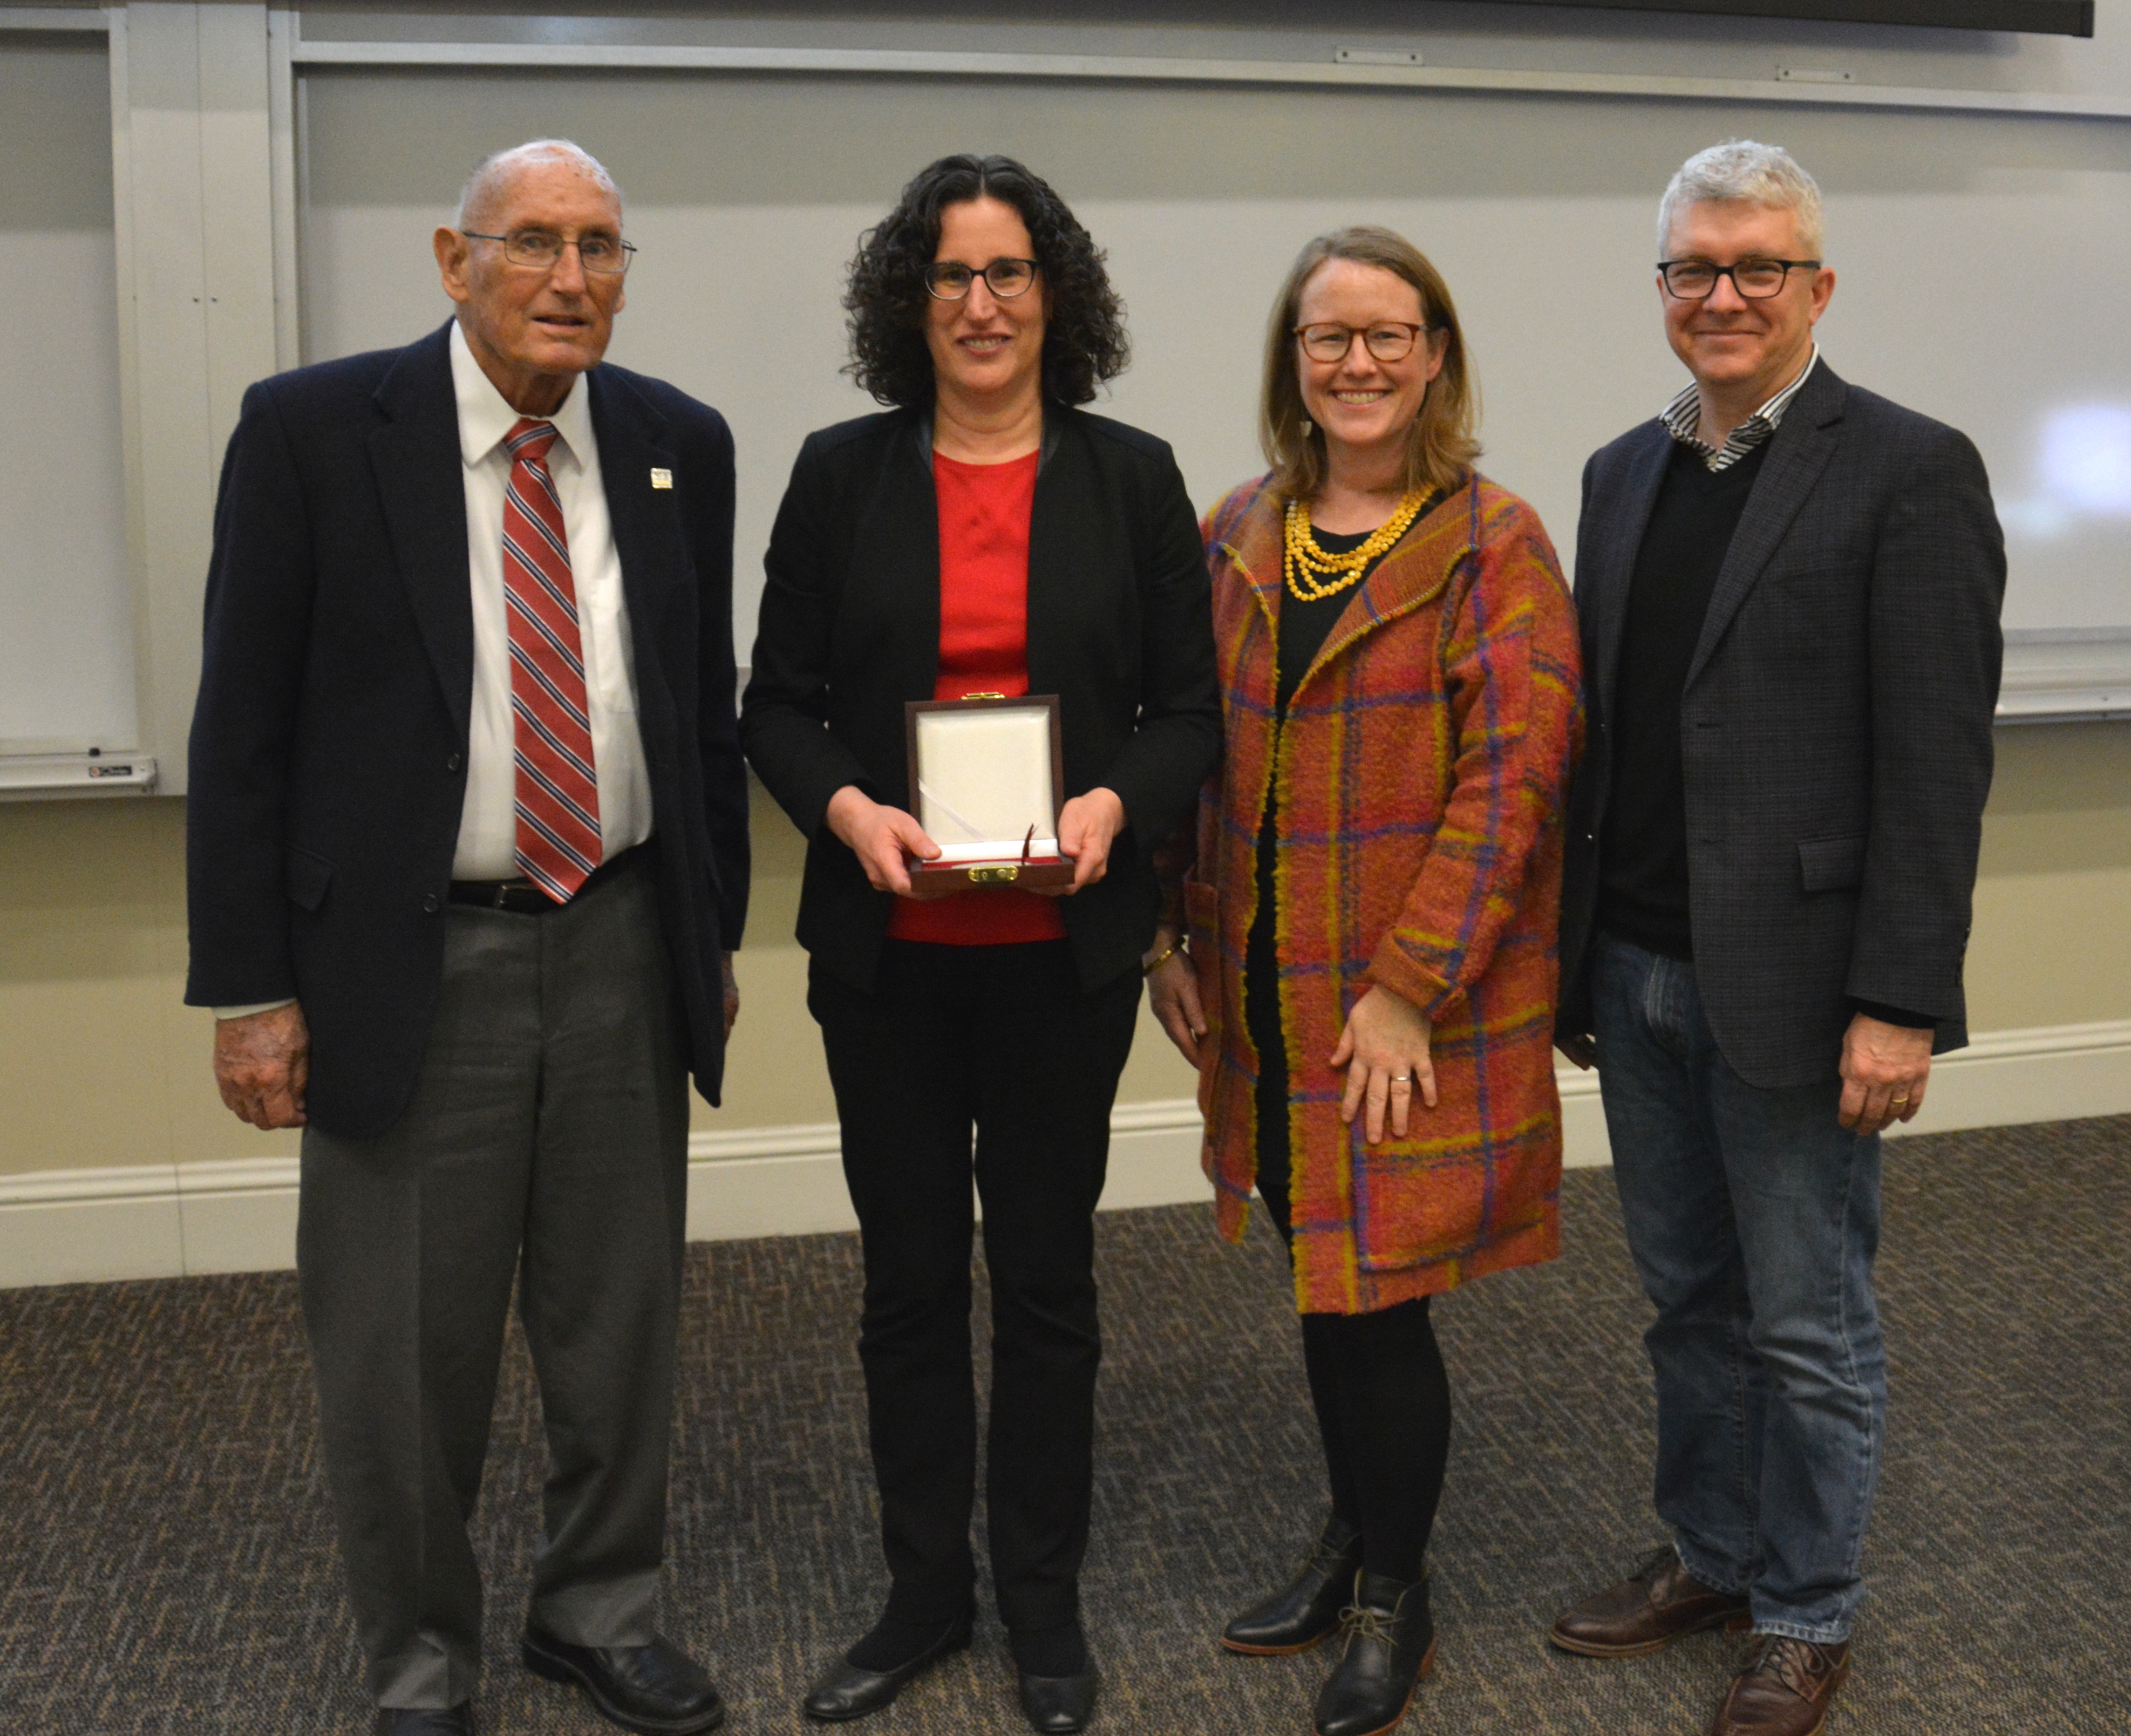  (Left to right): Mike Kosolapoff, Dr. Sharon Hammes-Schiffer, Lara Kosolapoff-Wright and Jerry Wright at the 34th Annual Auburn – G.M. Kosolapoff Award Lecture.